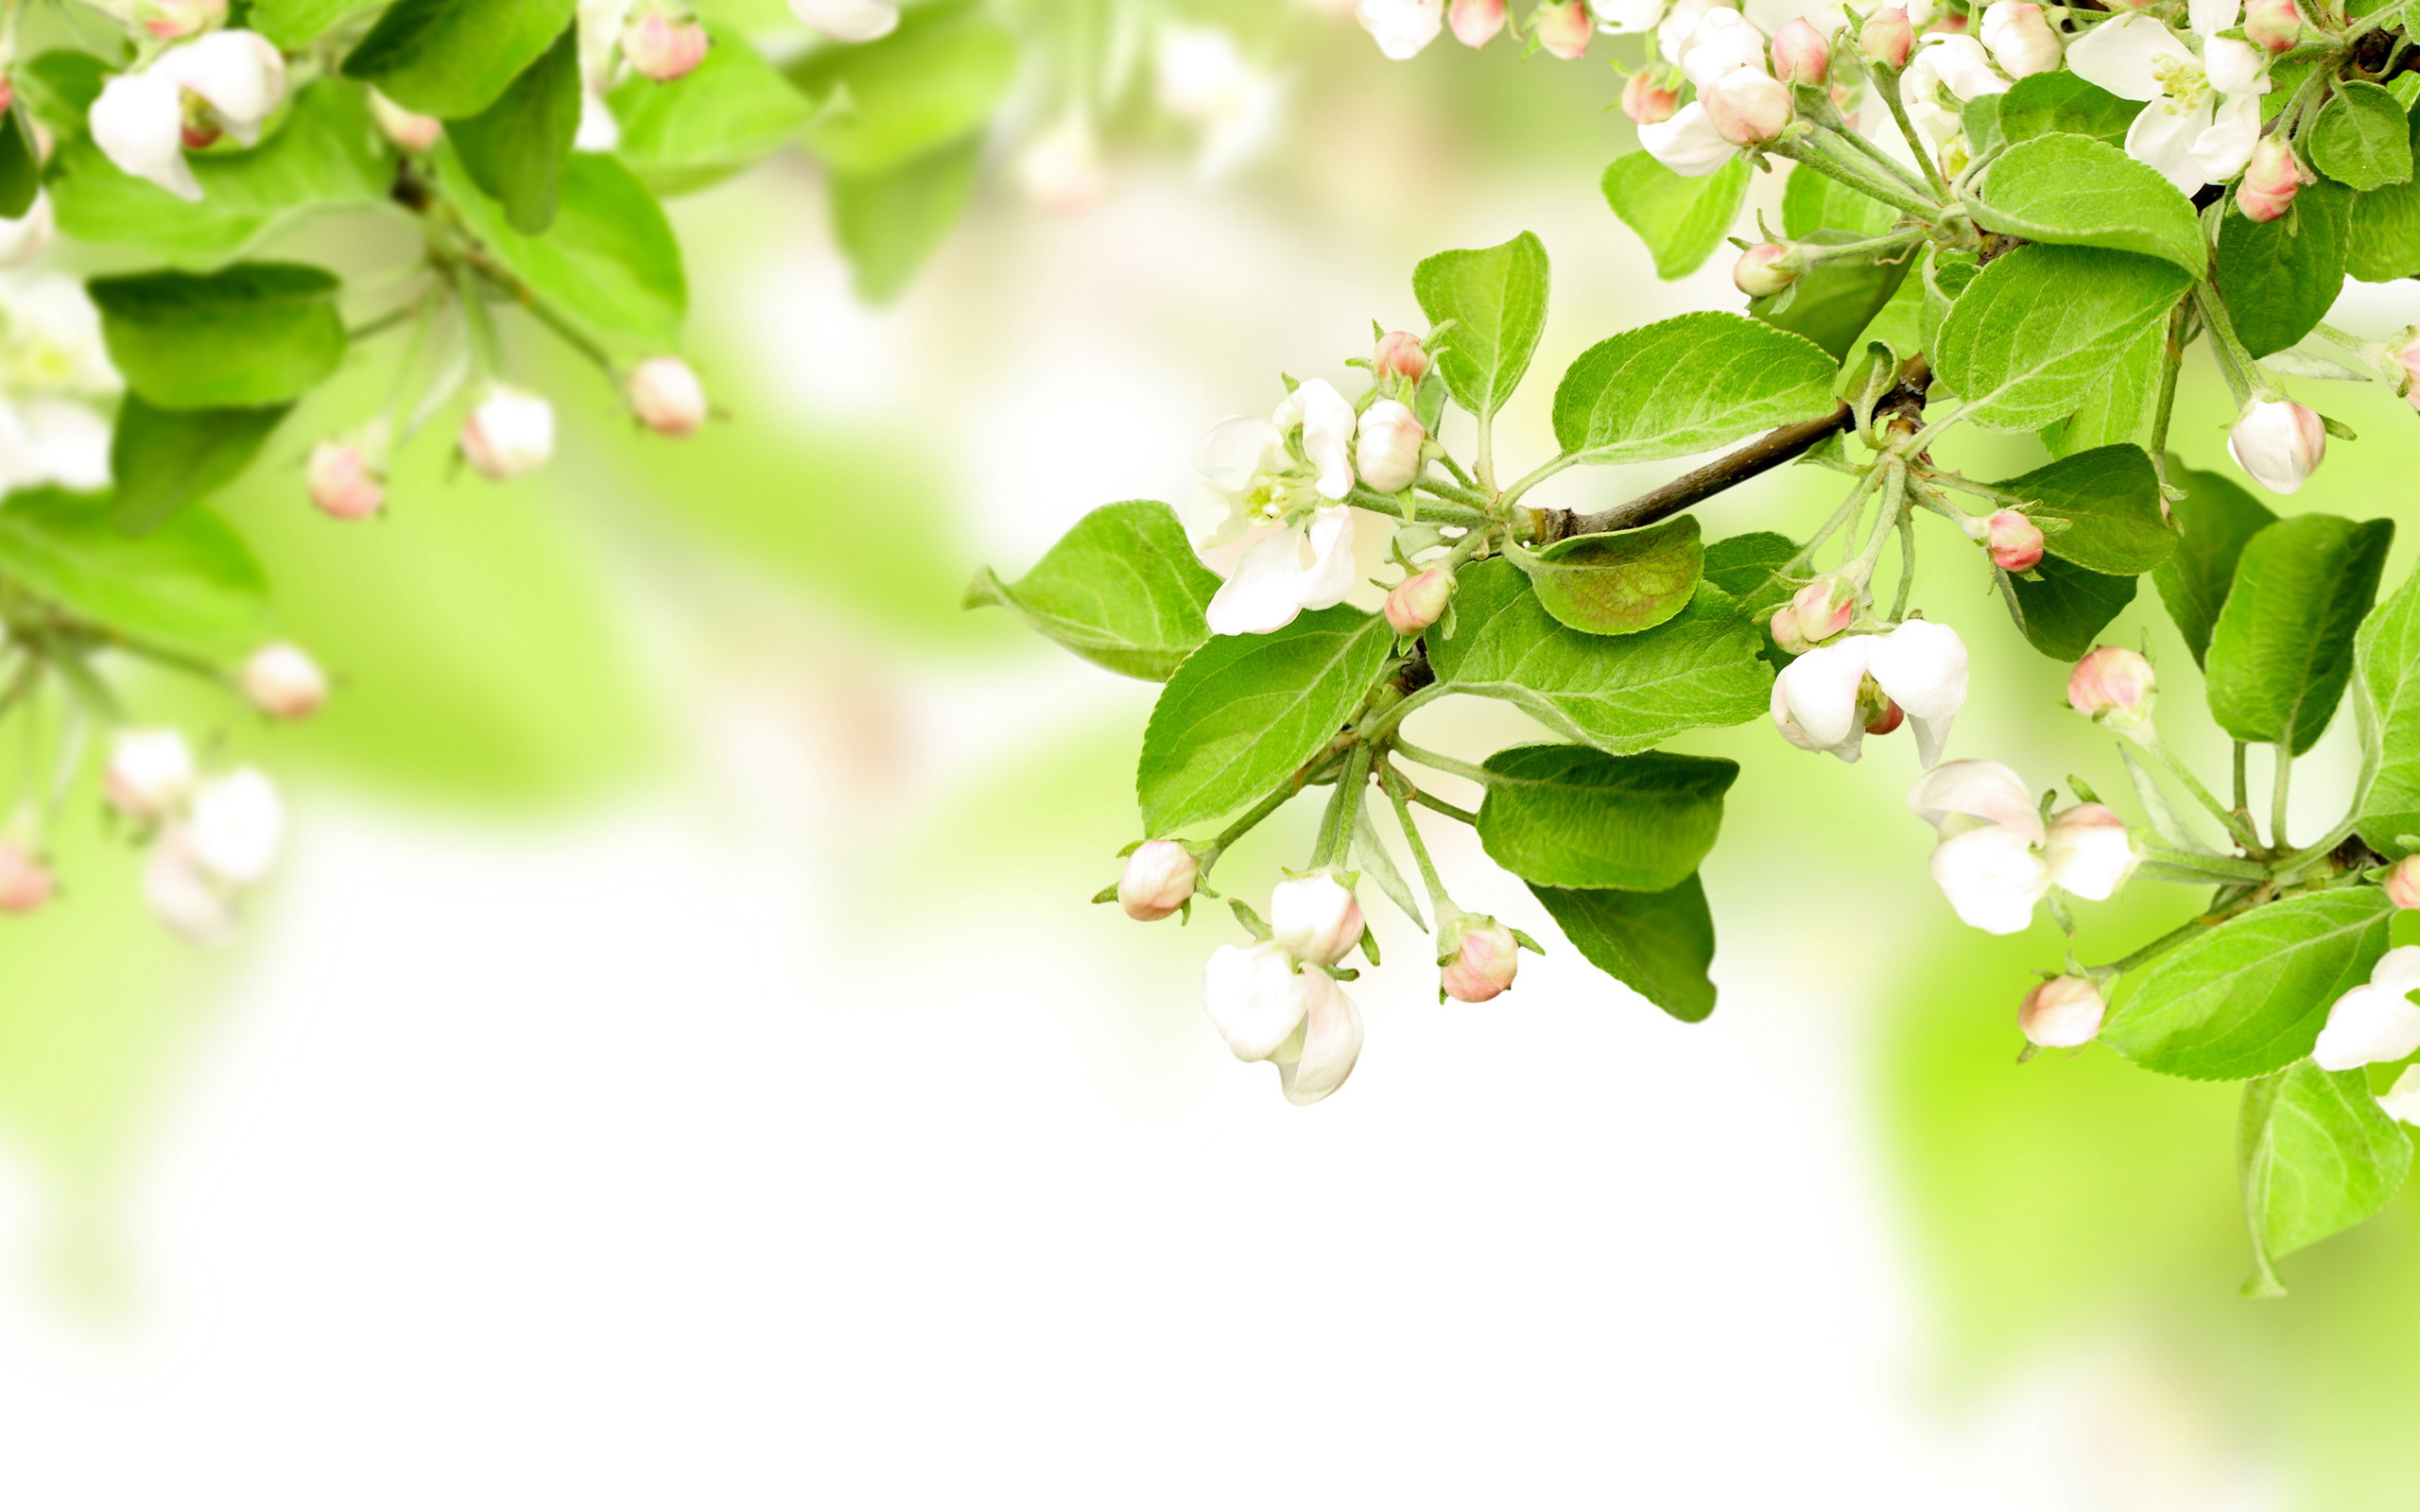 leaves, Spring, Flowers, Apples, Branches, Blossom Wallpaper